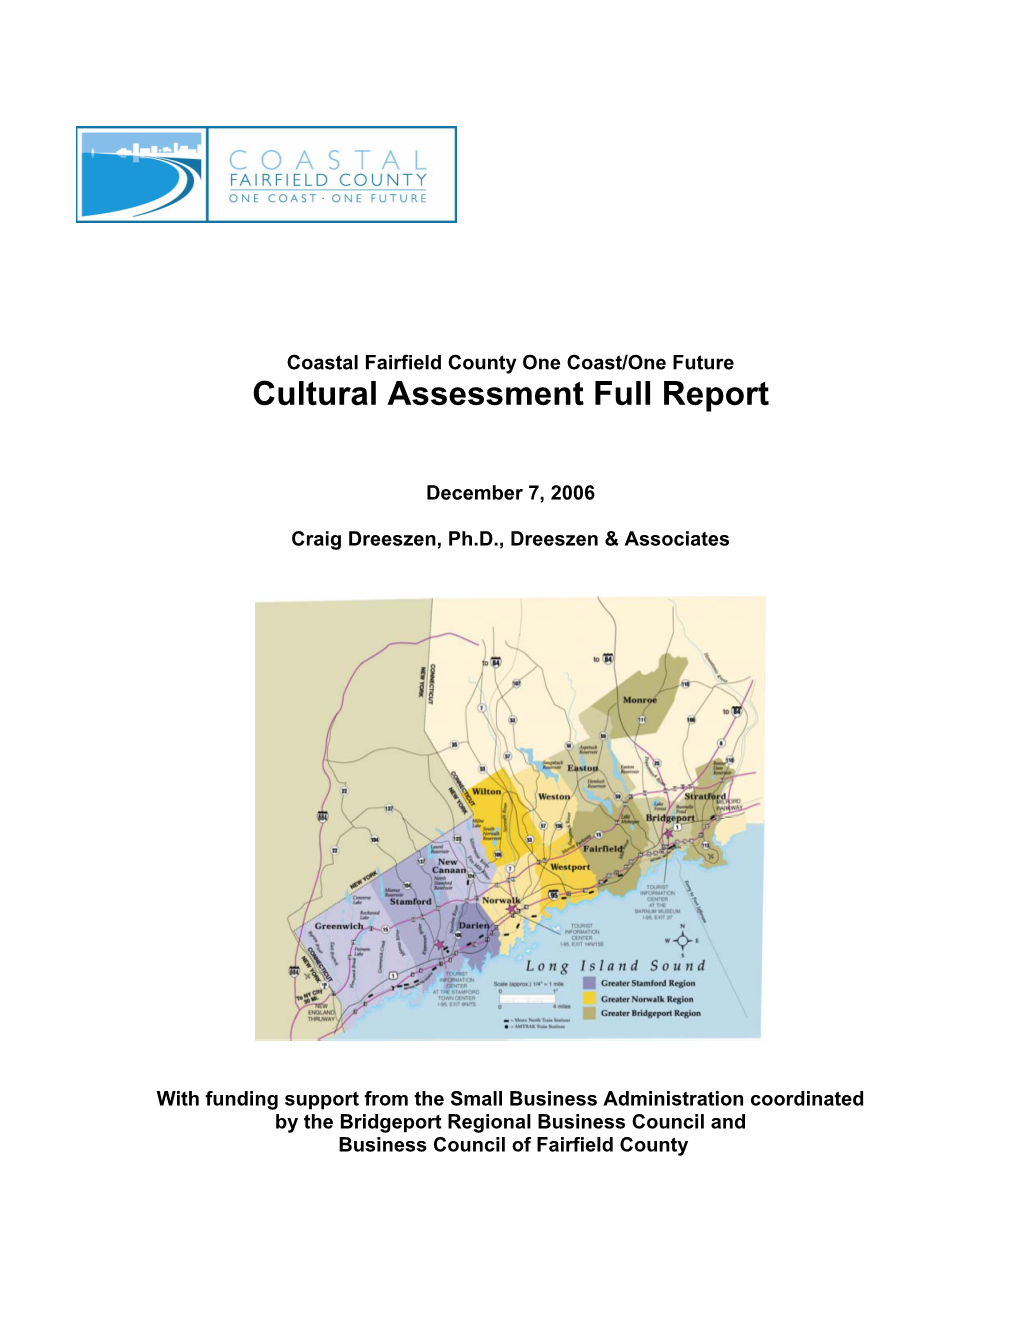 Fairfield County Cultural Assessment